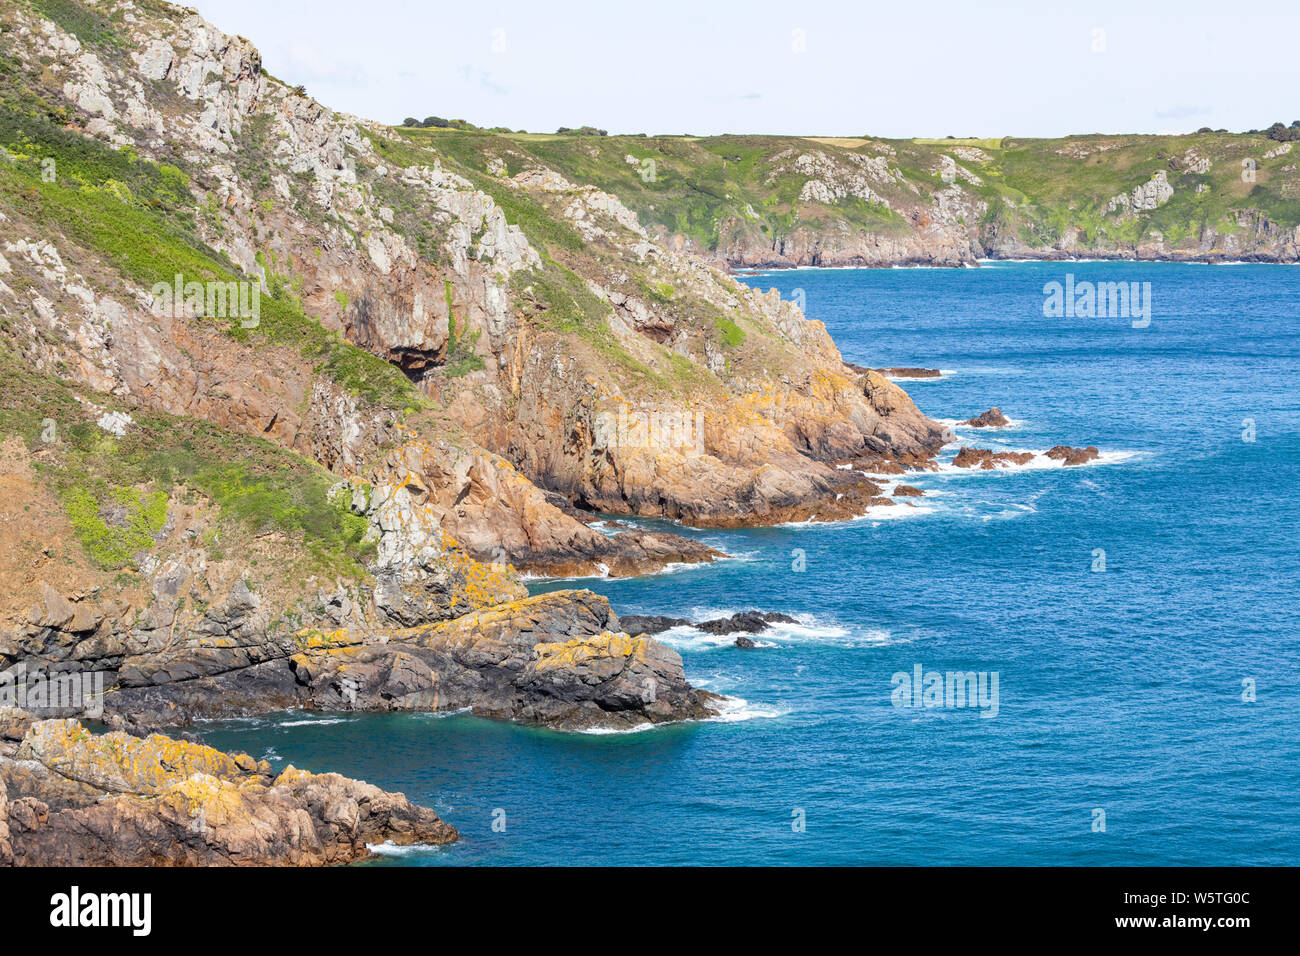 The view NE from the cliffs at Pointe de la Moye, Le Gouffre, Les Villets on the beautiful, rugged south coast of Guernsey, Channel Islands UK Stock Photo